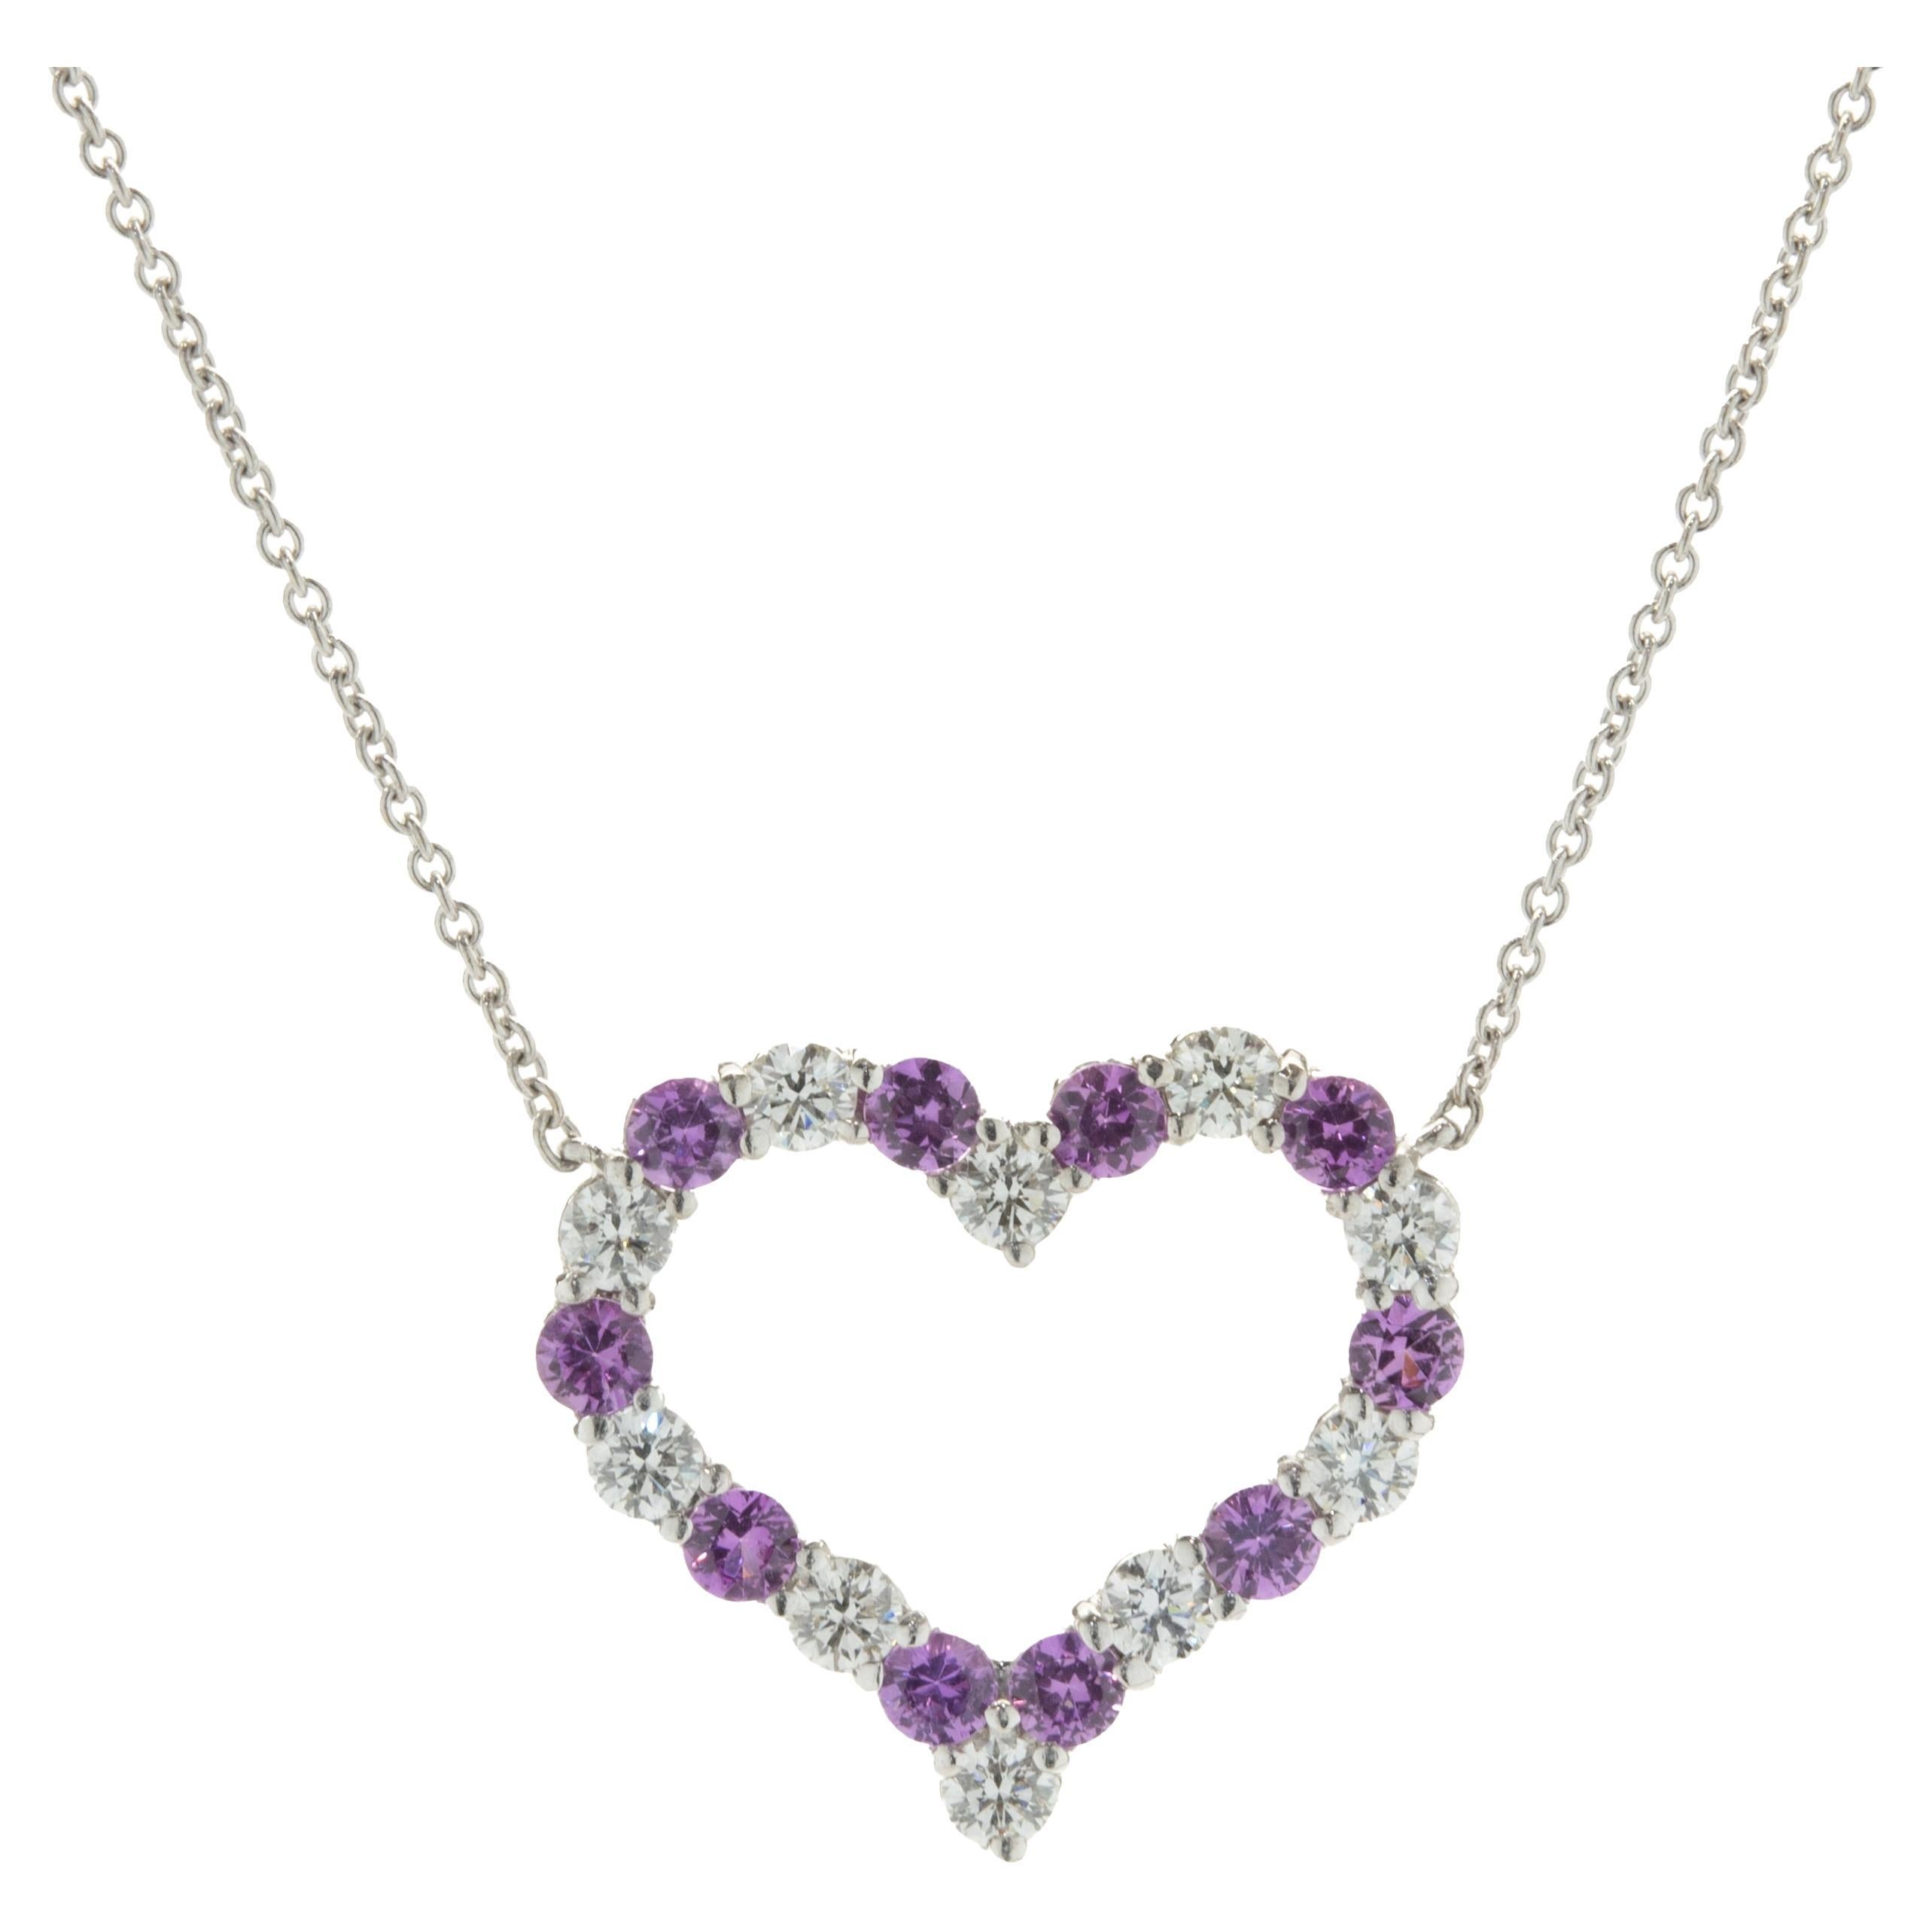 Tiffany & Co. Platinum & 14K White Gold Diamond and Pink Sapphire Heart Necklace